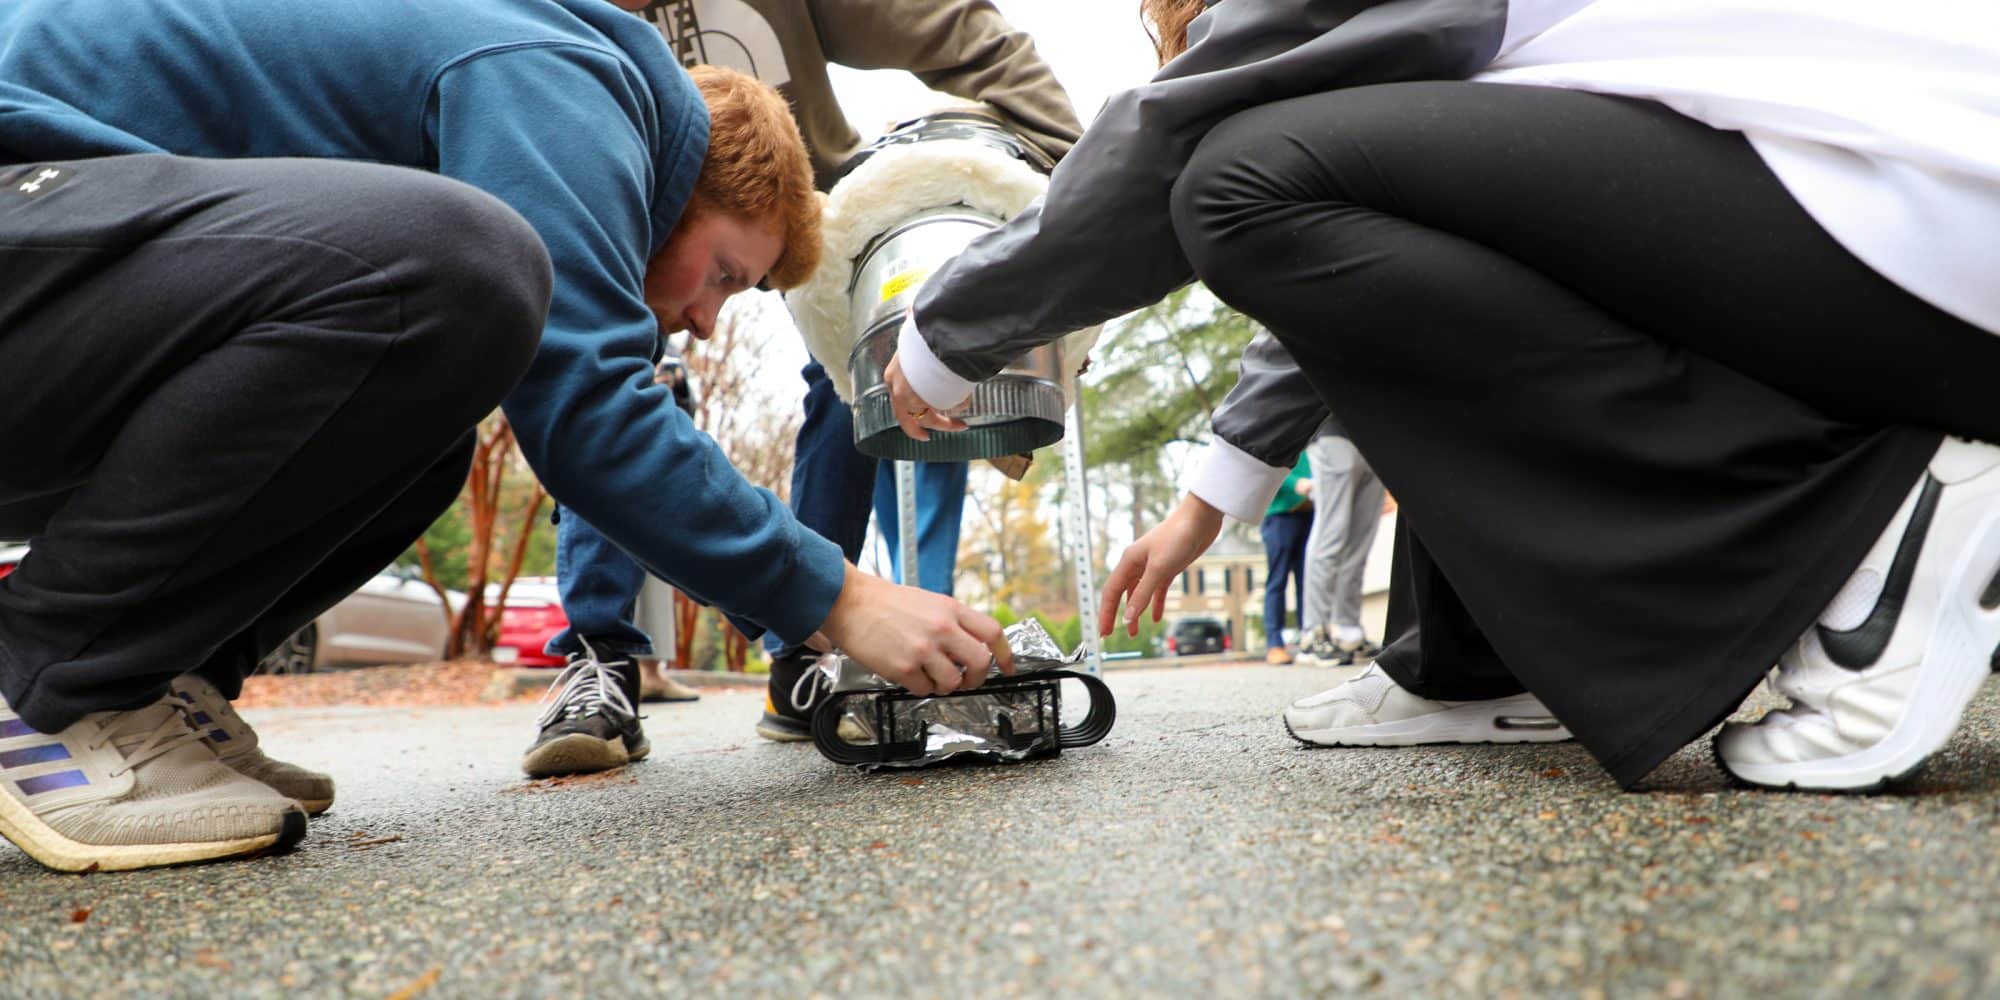 Randolph-Macon engineering students outdoors assembling a small robotic device on a pathway, surrounded by others observing the engineering process.